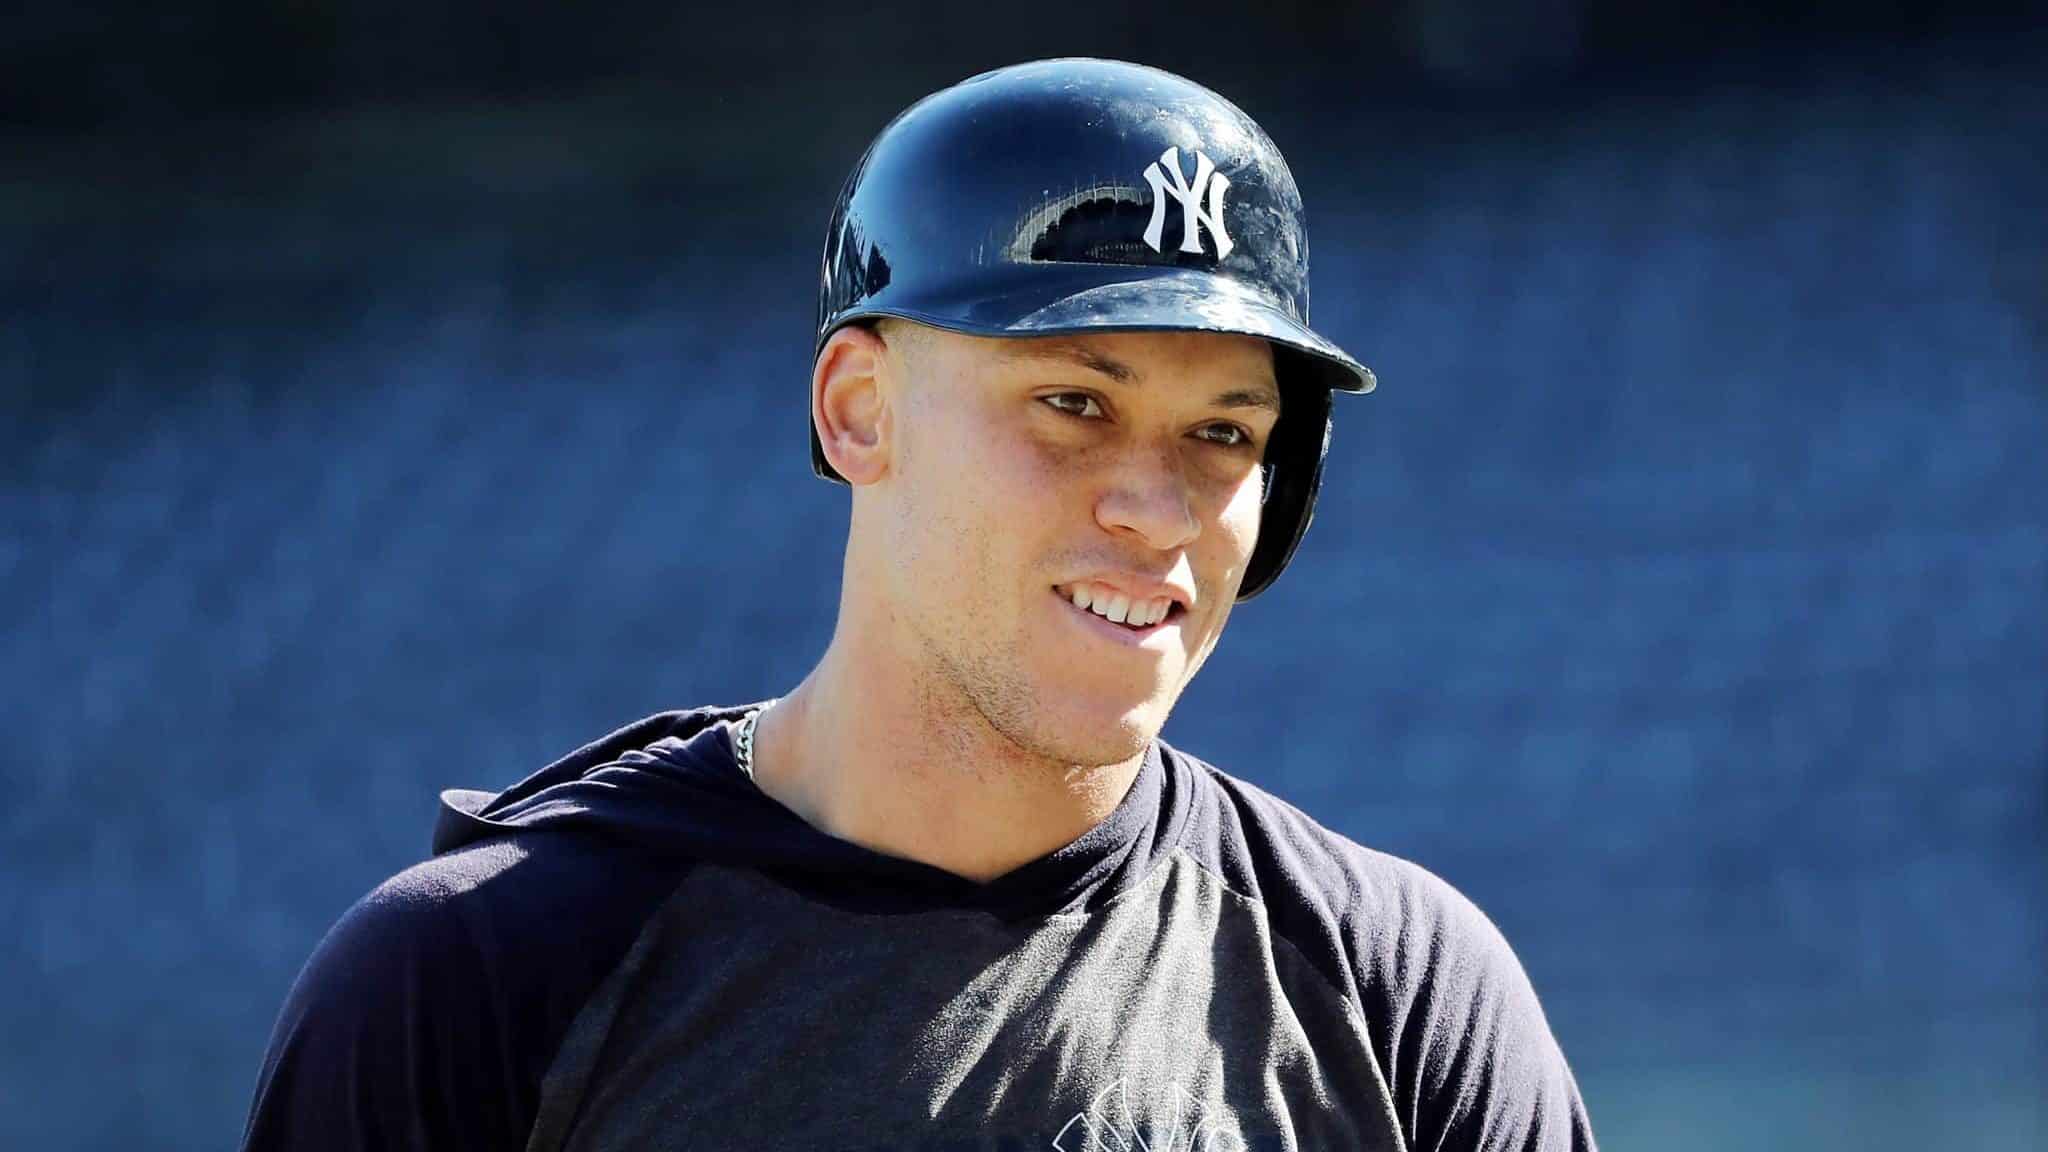 NEW YORK, NEW YORK - OCTOBER 15: Aaron Judge #99 of the New York Yankees looks on during batting practice prior to game three of the American League Championship Series against the Houston Astros at Yankee Stadium on October 15, 2019 in New York City.